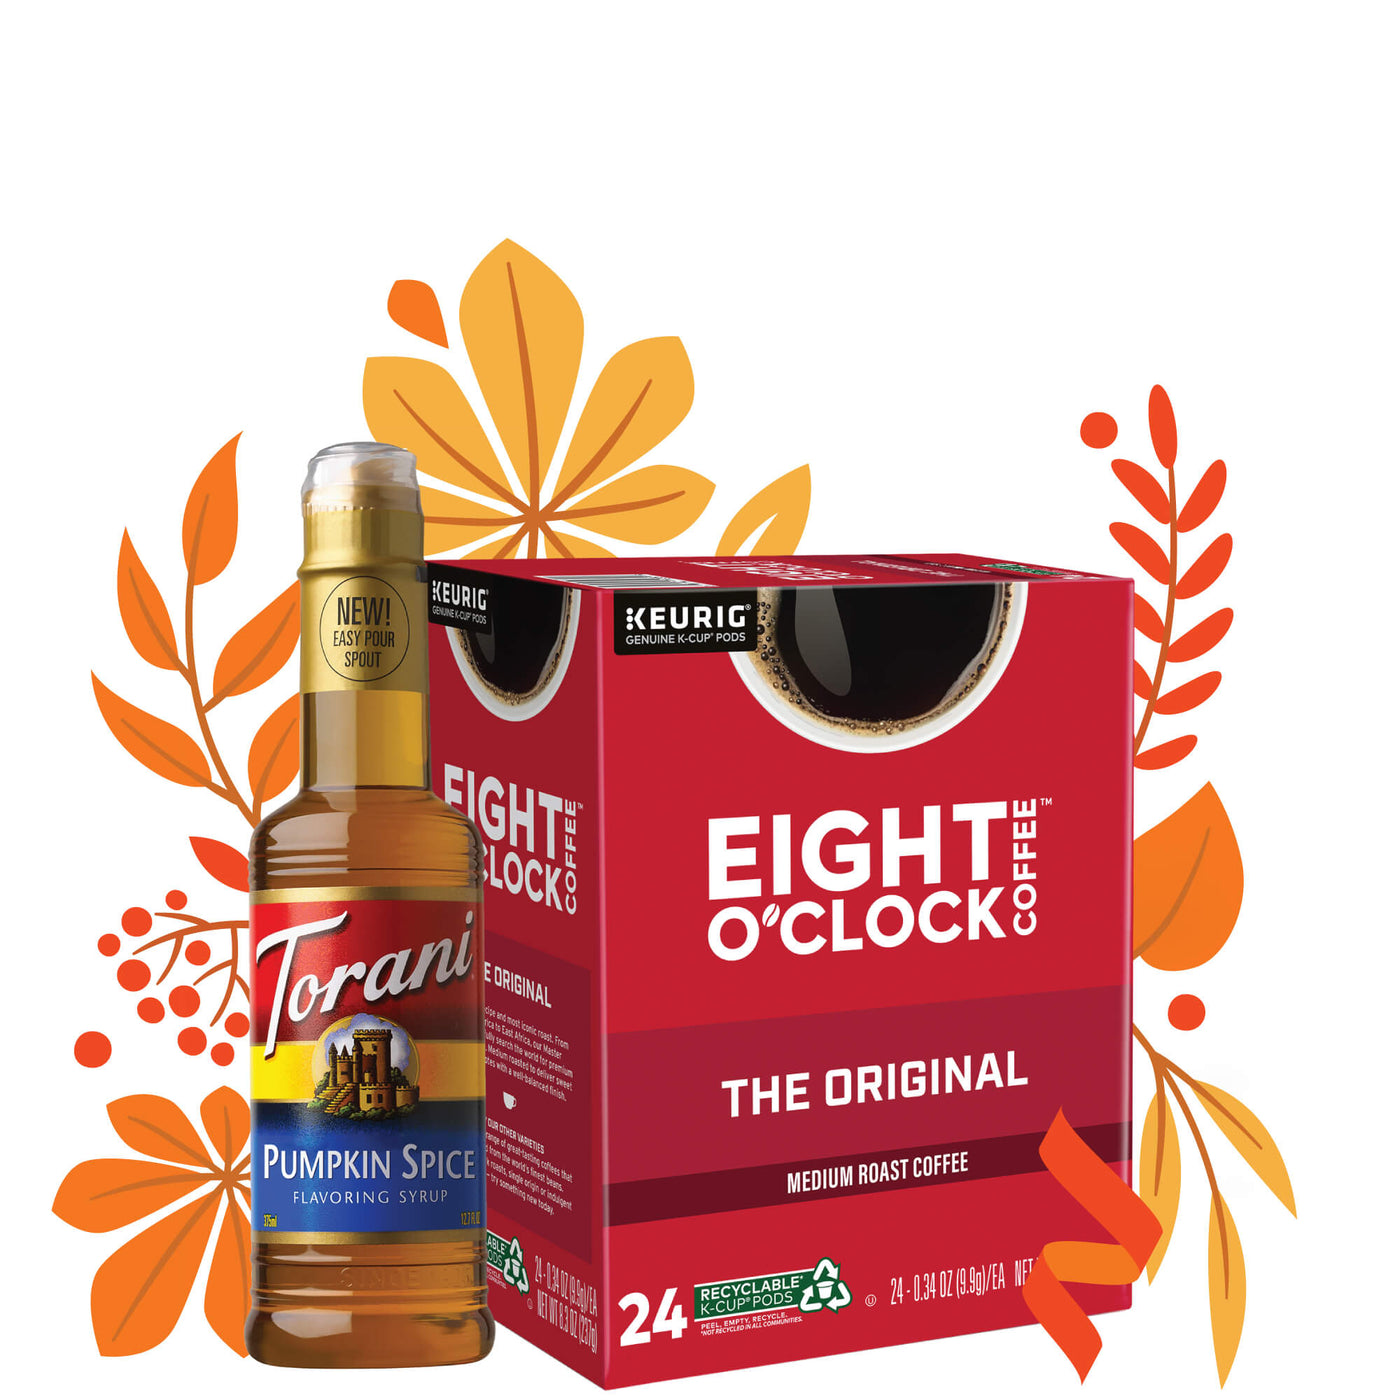 includes a 375 ml bottle of Torani Pumpkin Spice Syrup and a 48-count box of Eight O'Clock Original Blend K-Cup® Pods.